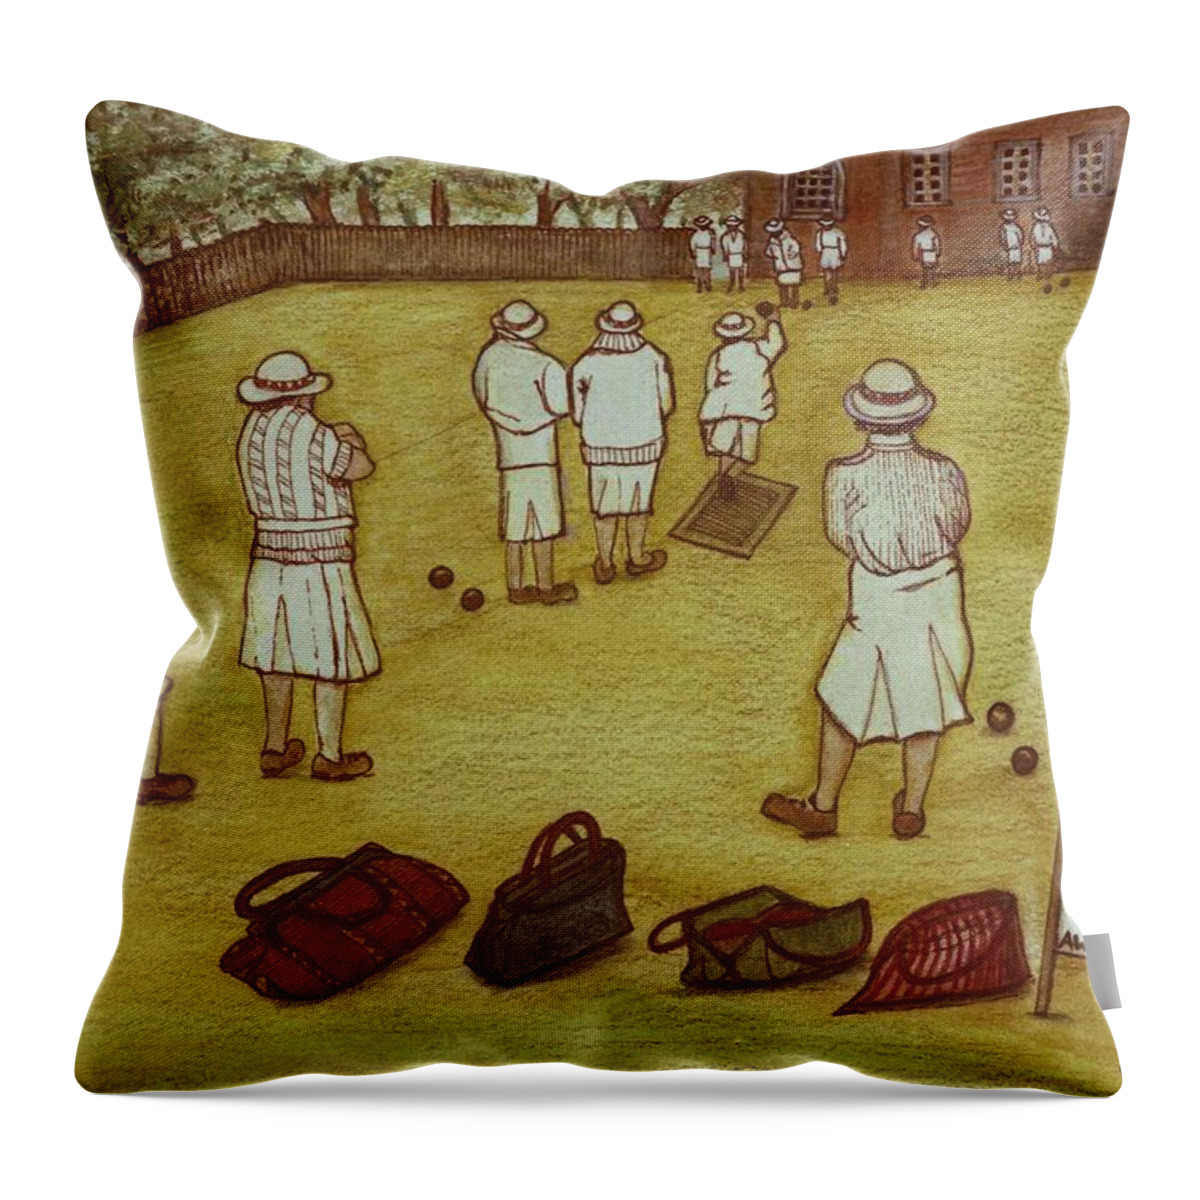 Bowling Throw Pillow featuring the photograph Bowling, 1988 Watercolour On Paper by Gillian Lawson